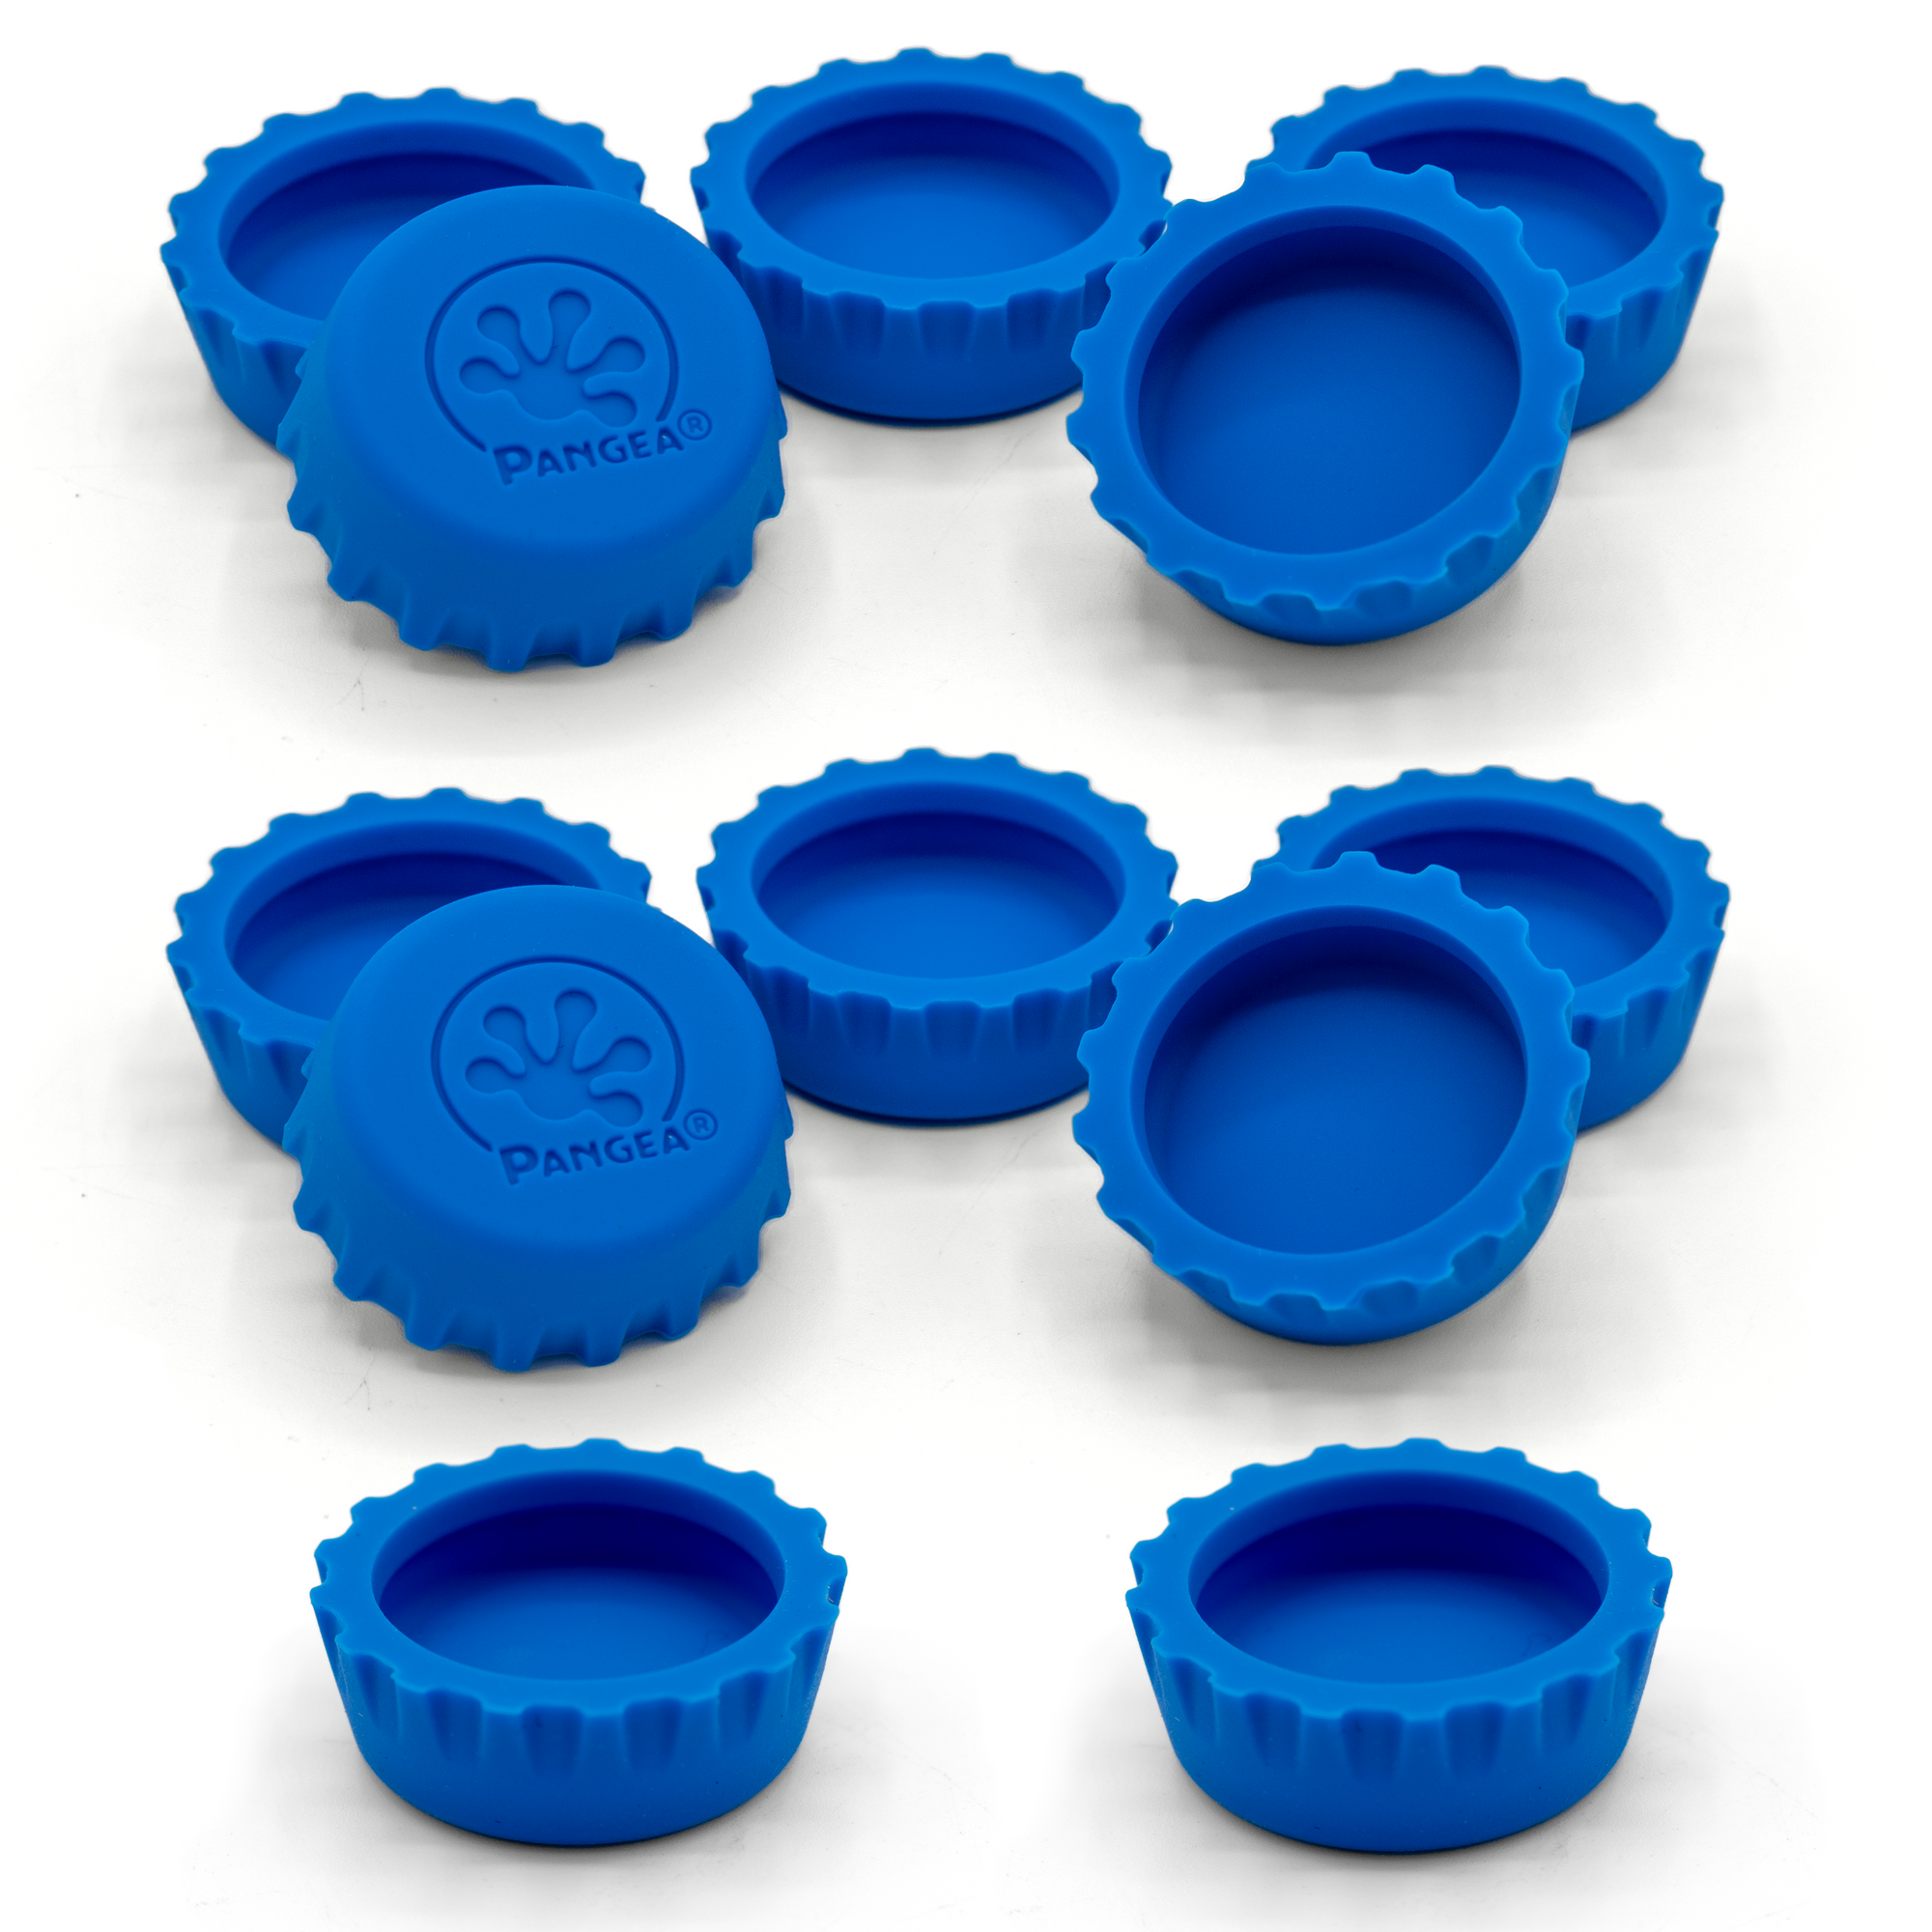 12-Pack of Silicone Bottle Cap Feeding Dishes - Blue